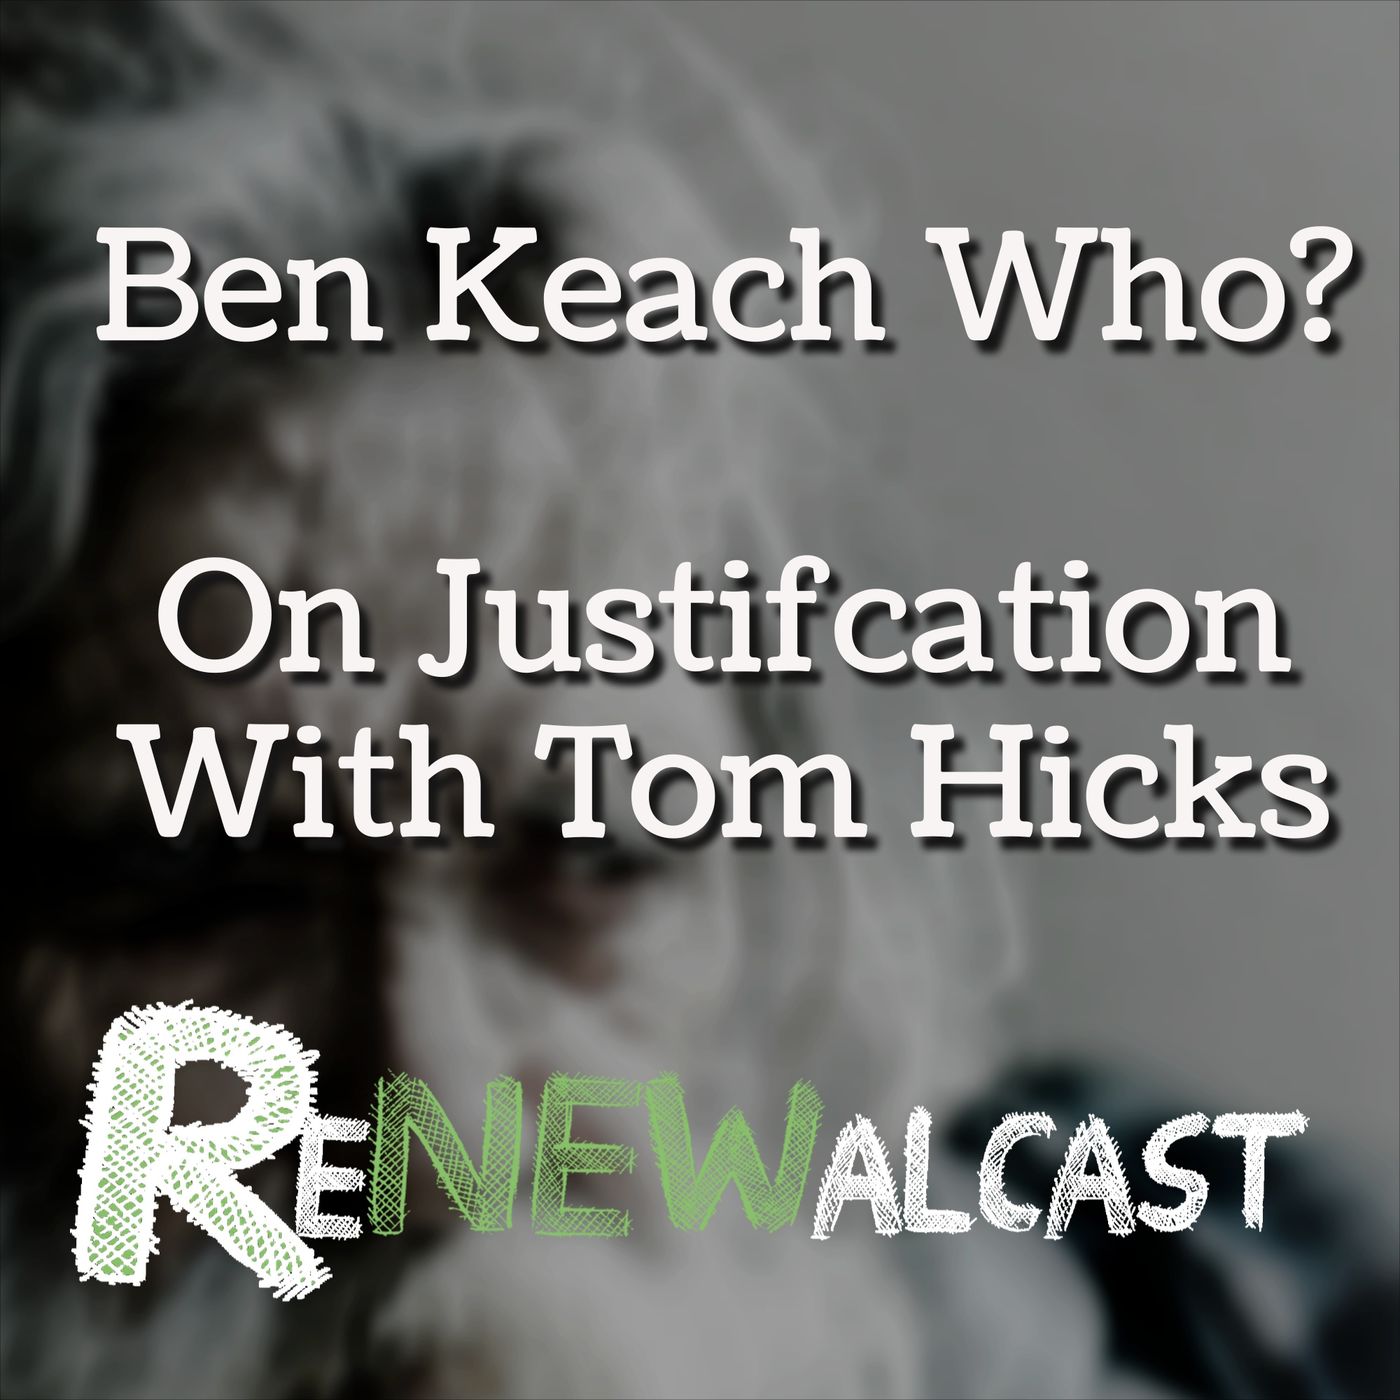 Ben Keach Who? On Justification with Tom Hicks